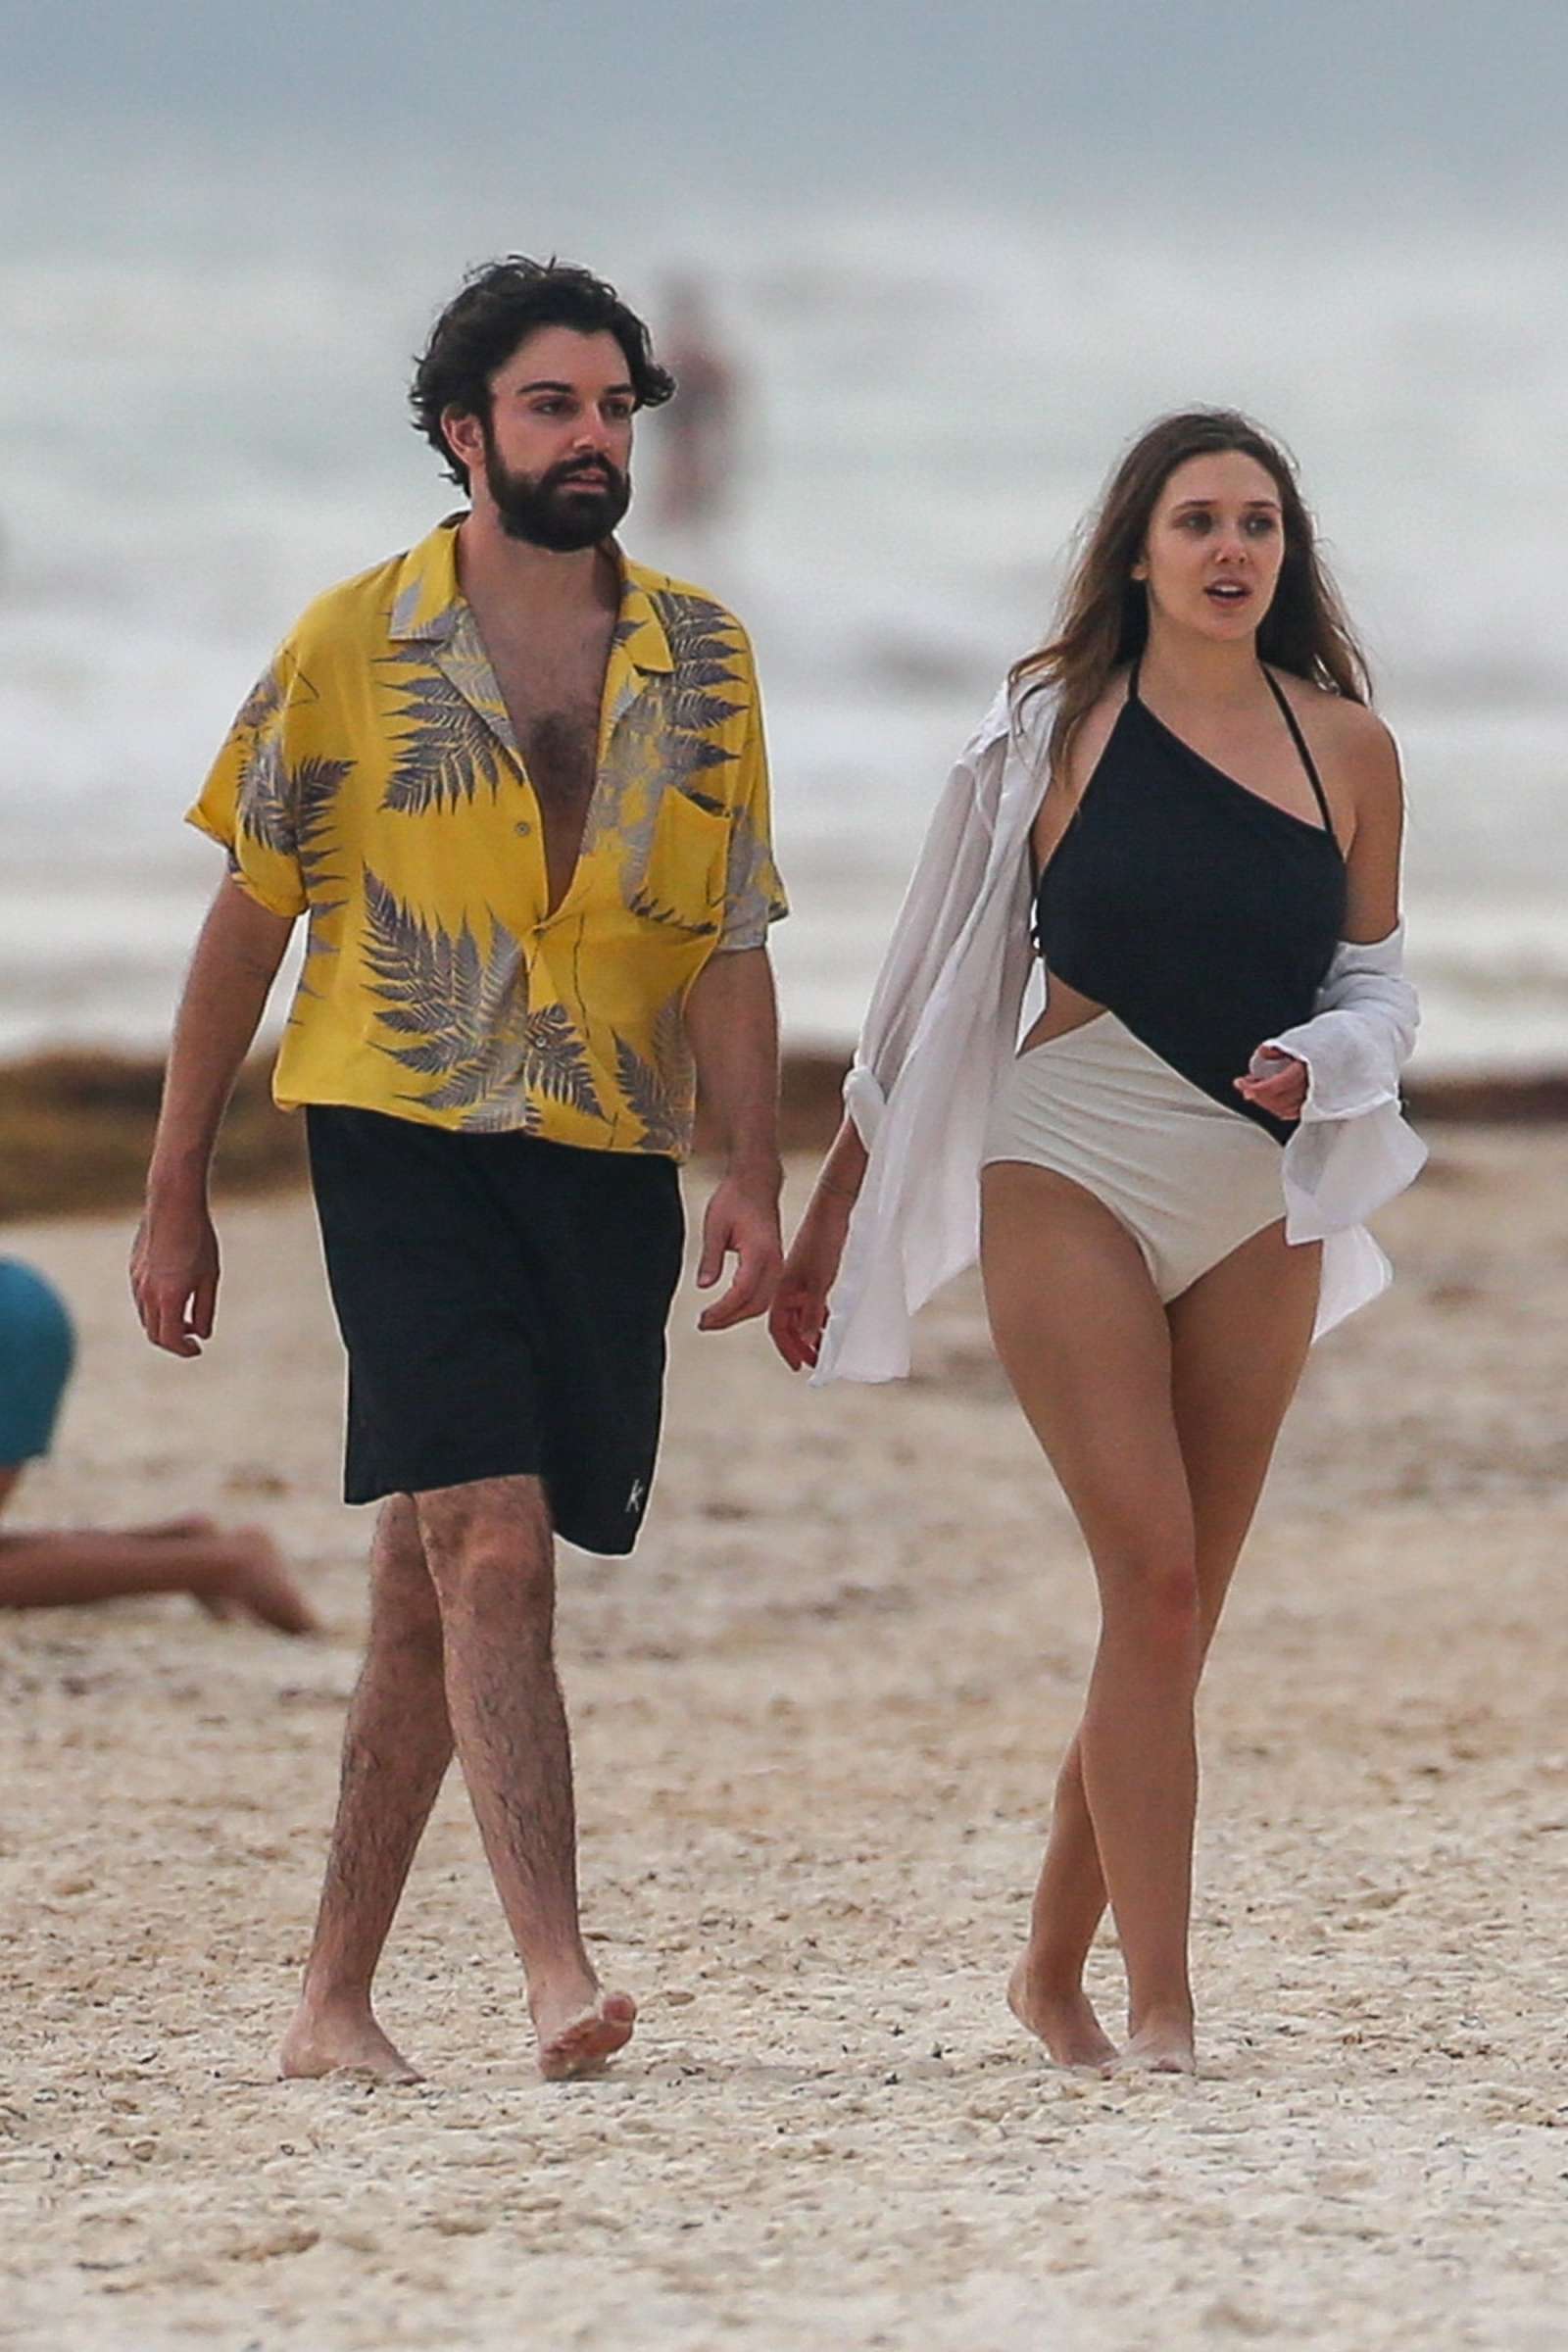 Elizabeth Olsen in Black and White Swimsuit at a beach in Mexico